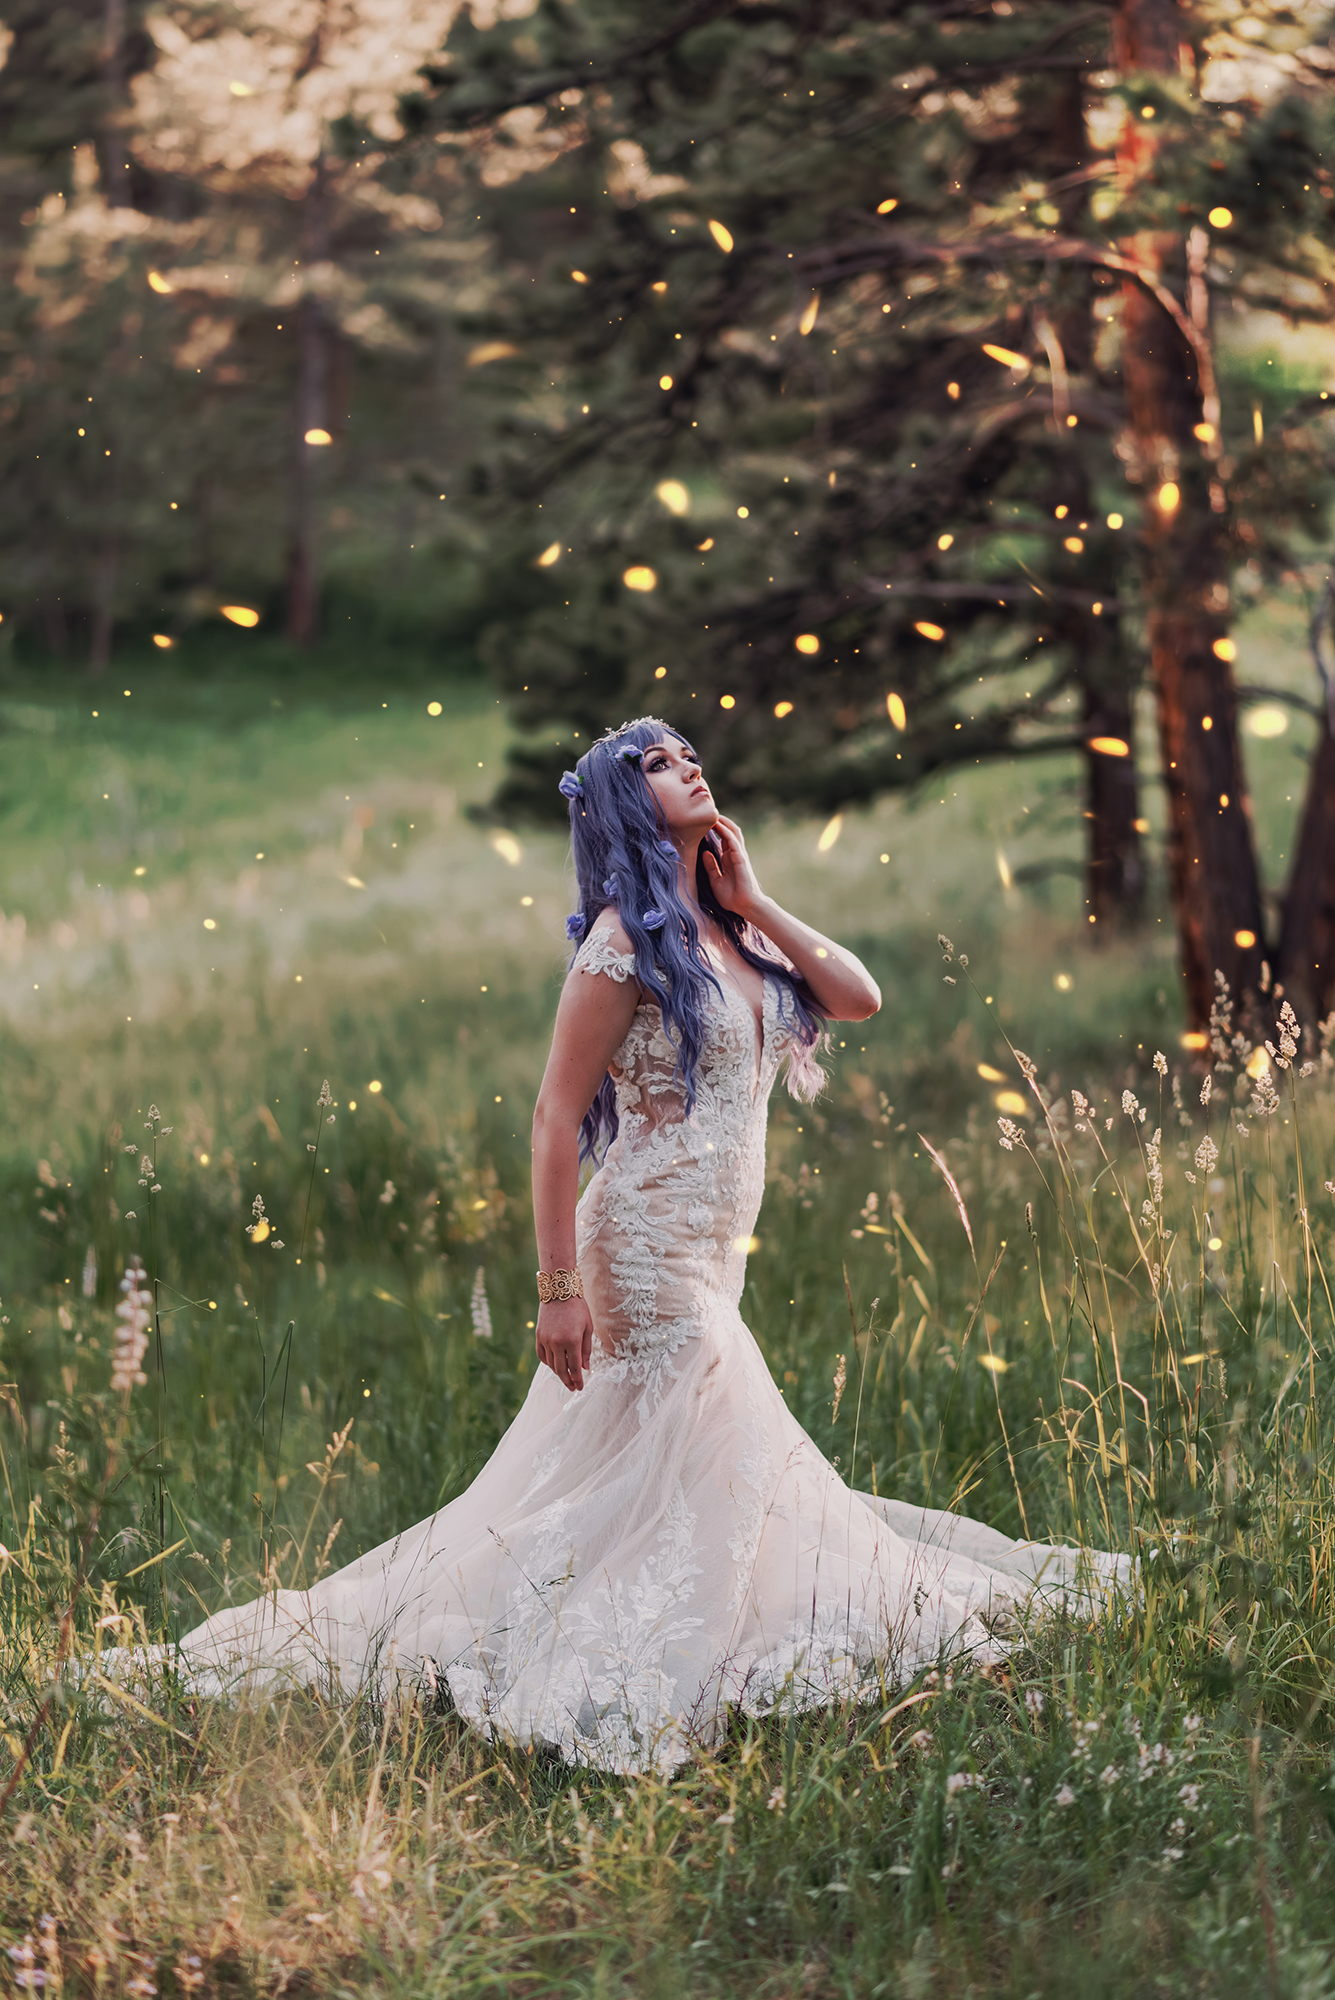 A woman with purple hair, wearing a white wedding dress, stands in a field in a forest in Boulder Colorado for a fantasy bridal portrait by Kendra Colleen Photography